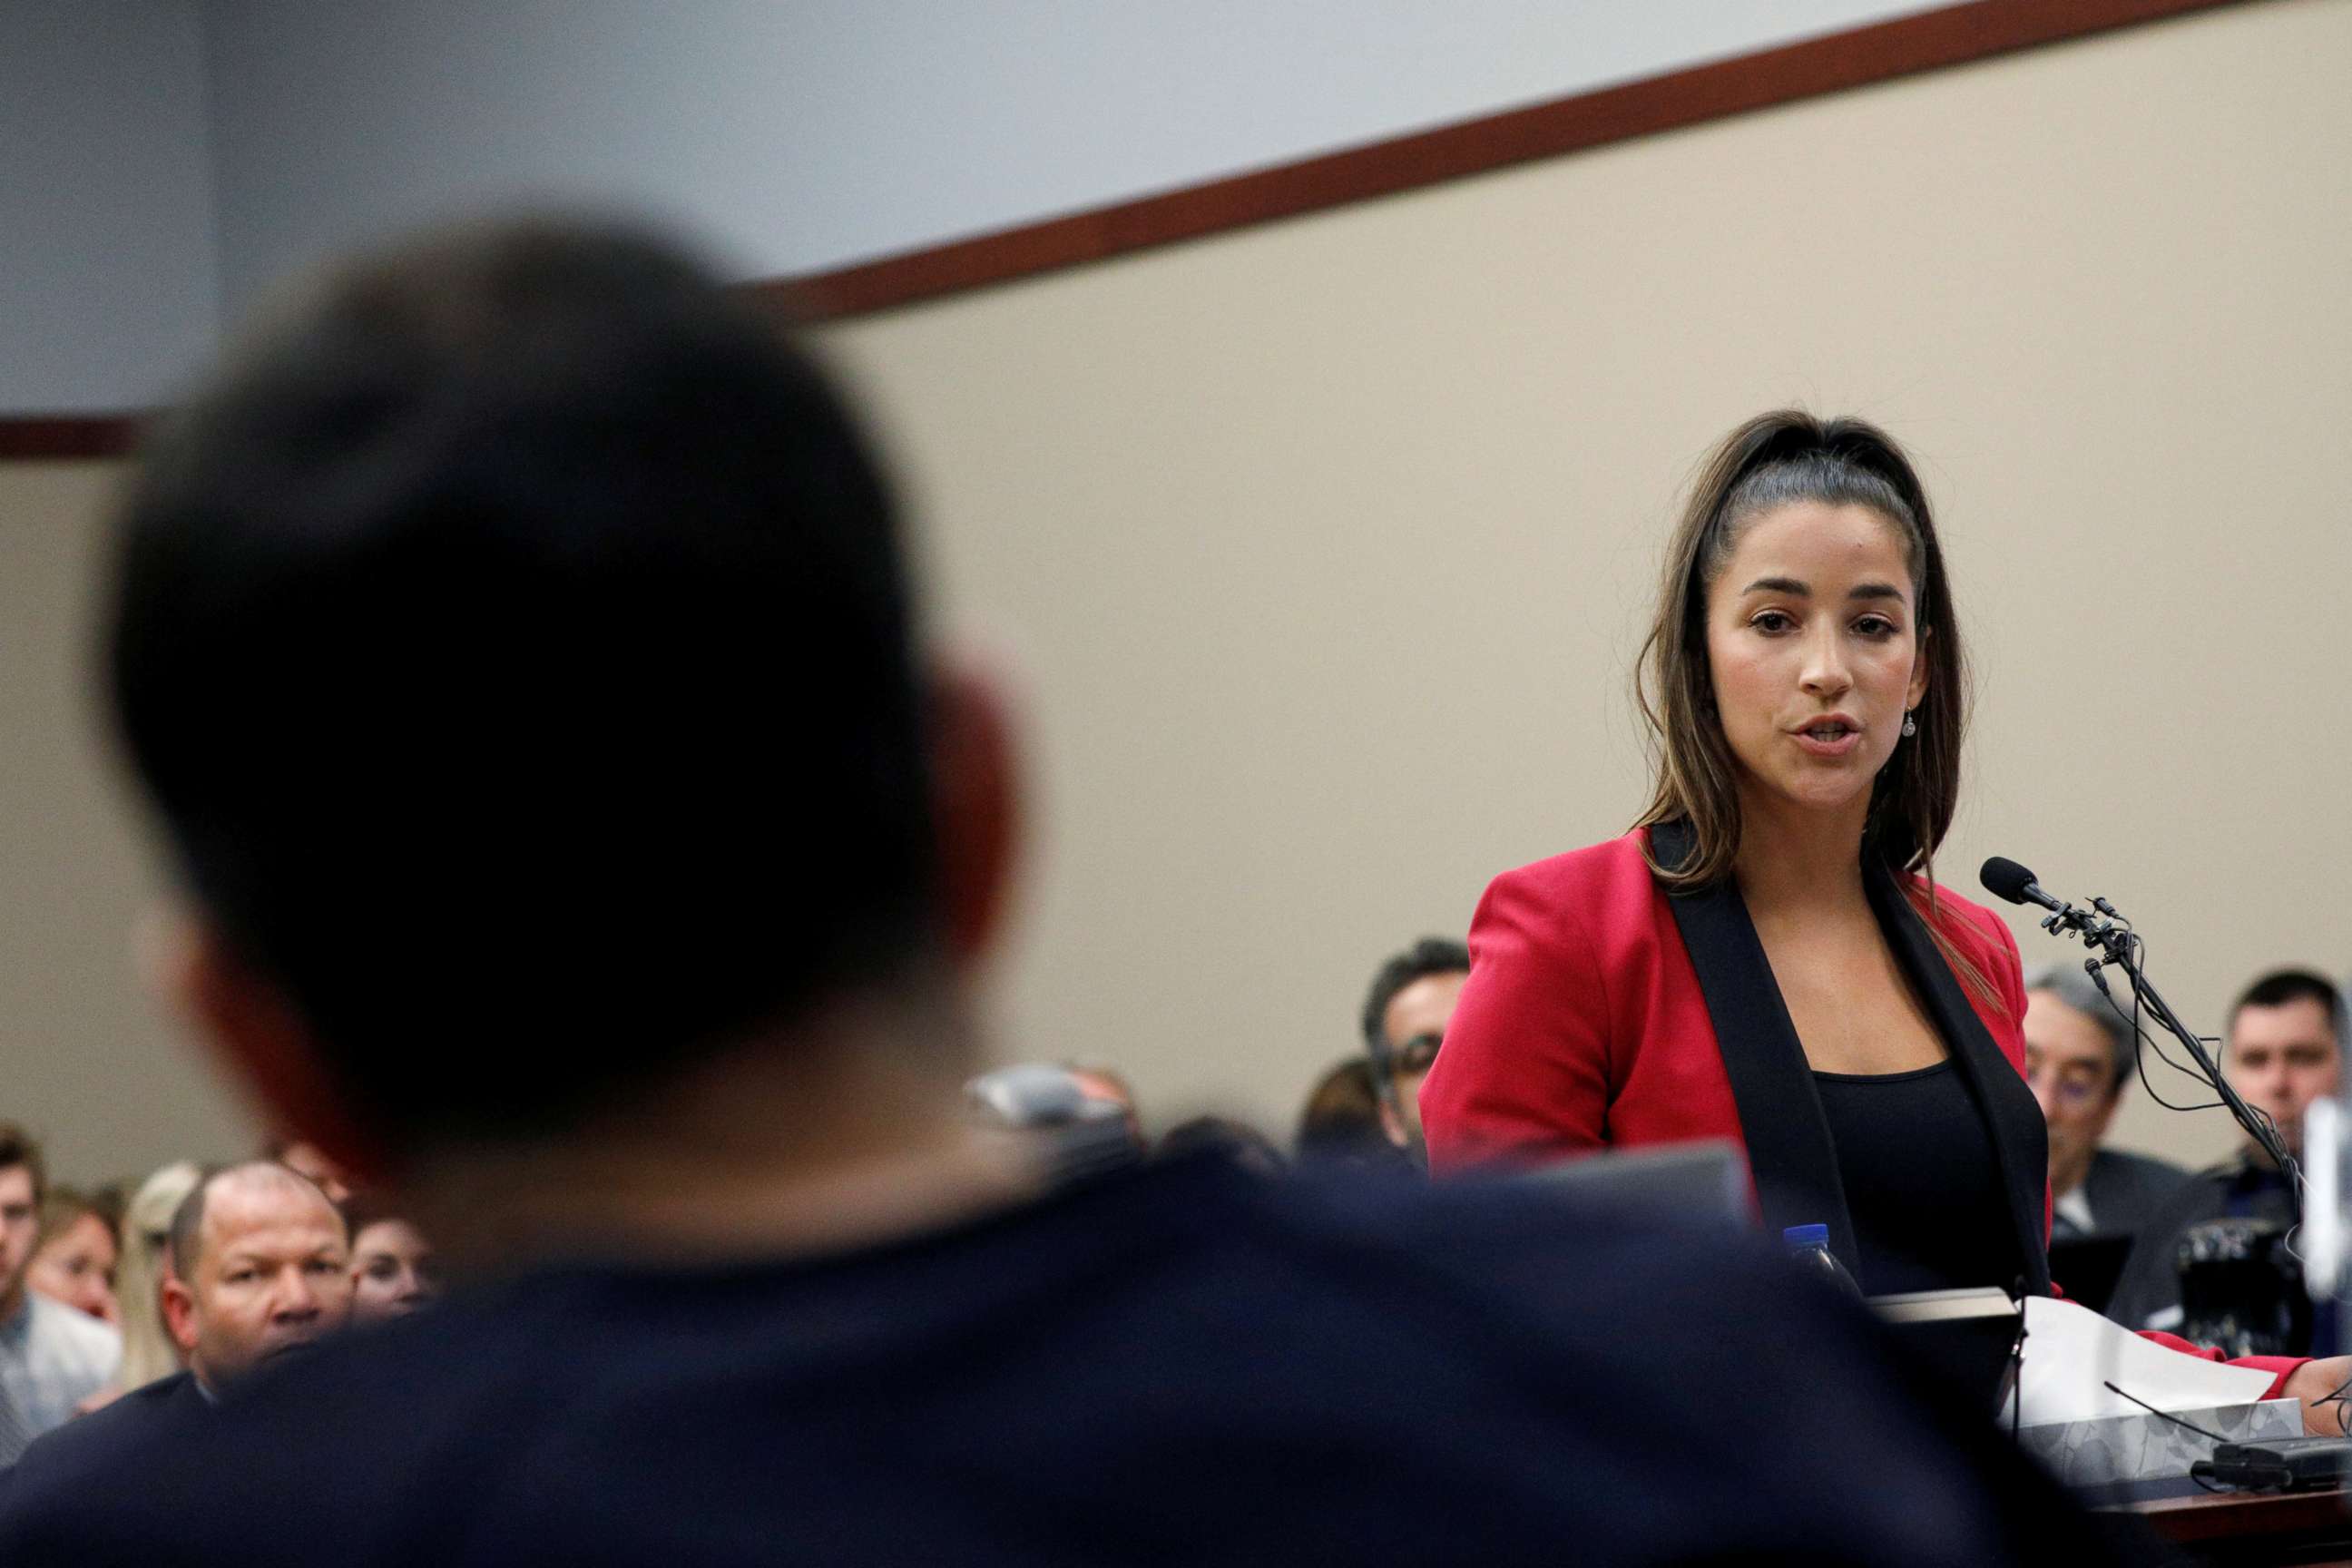 PHOTO: Olympic gold medalist Aly Raisman speaks at the sentencing hearing for Larry Nassar in Lansing, Mich., Jan. 19, 2018.